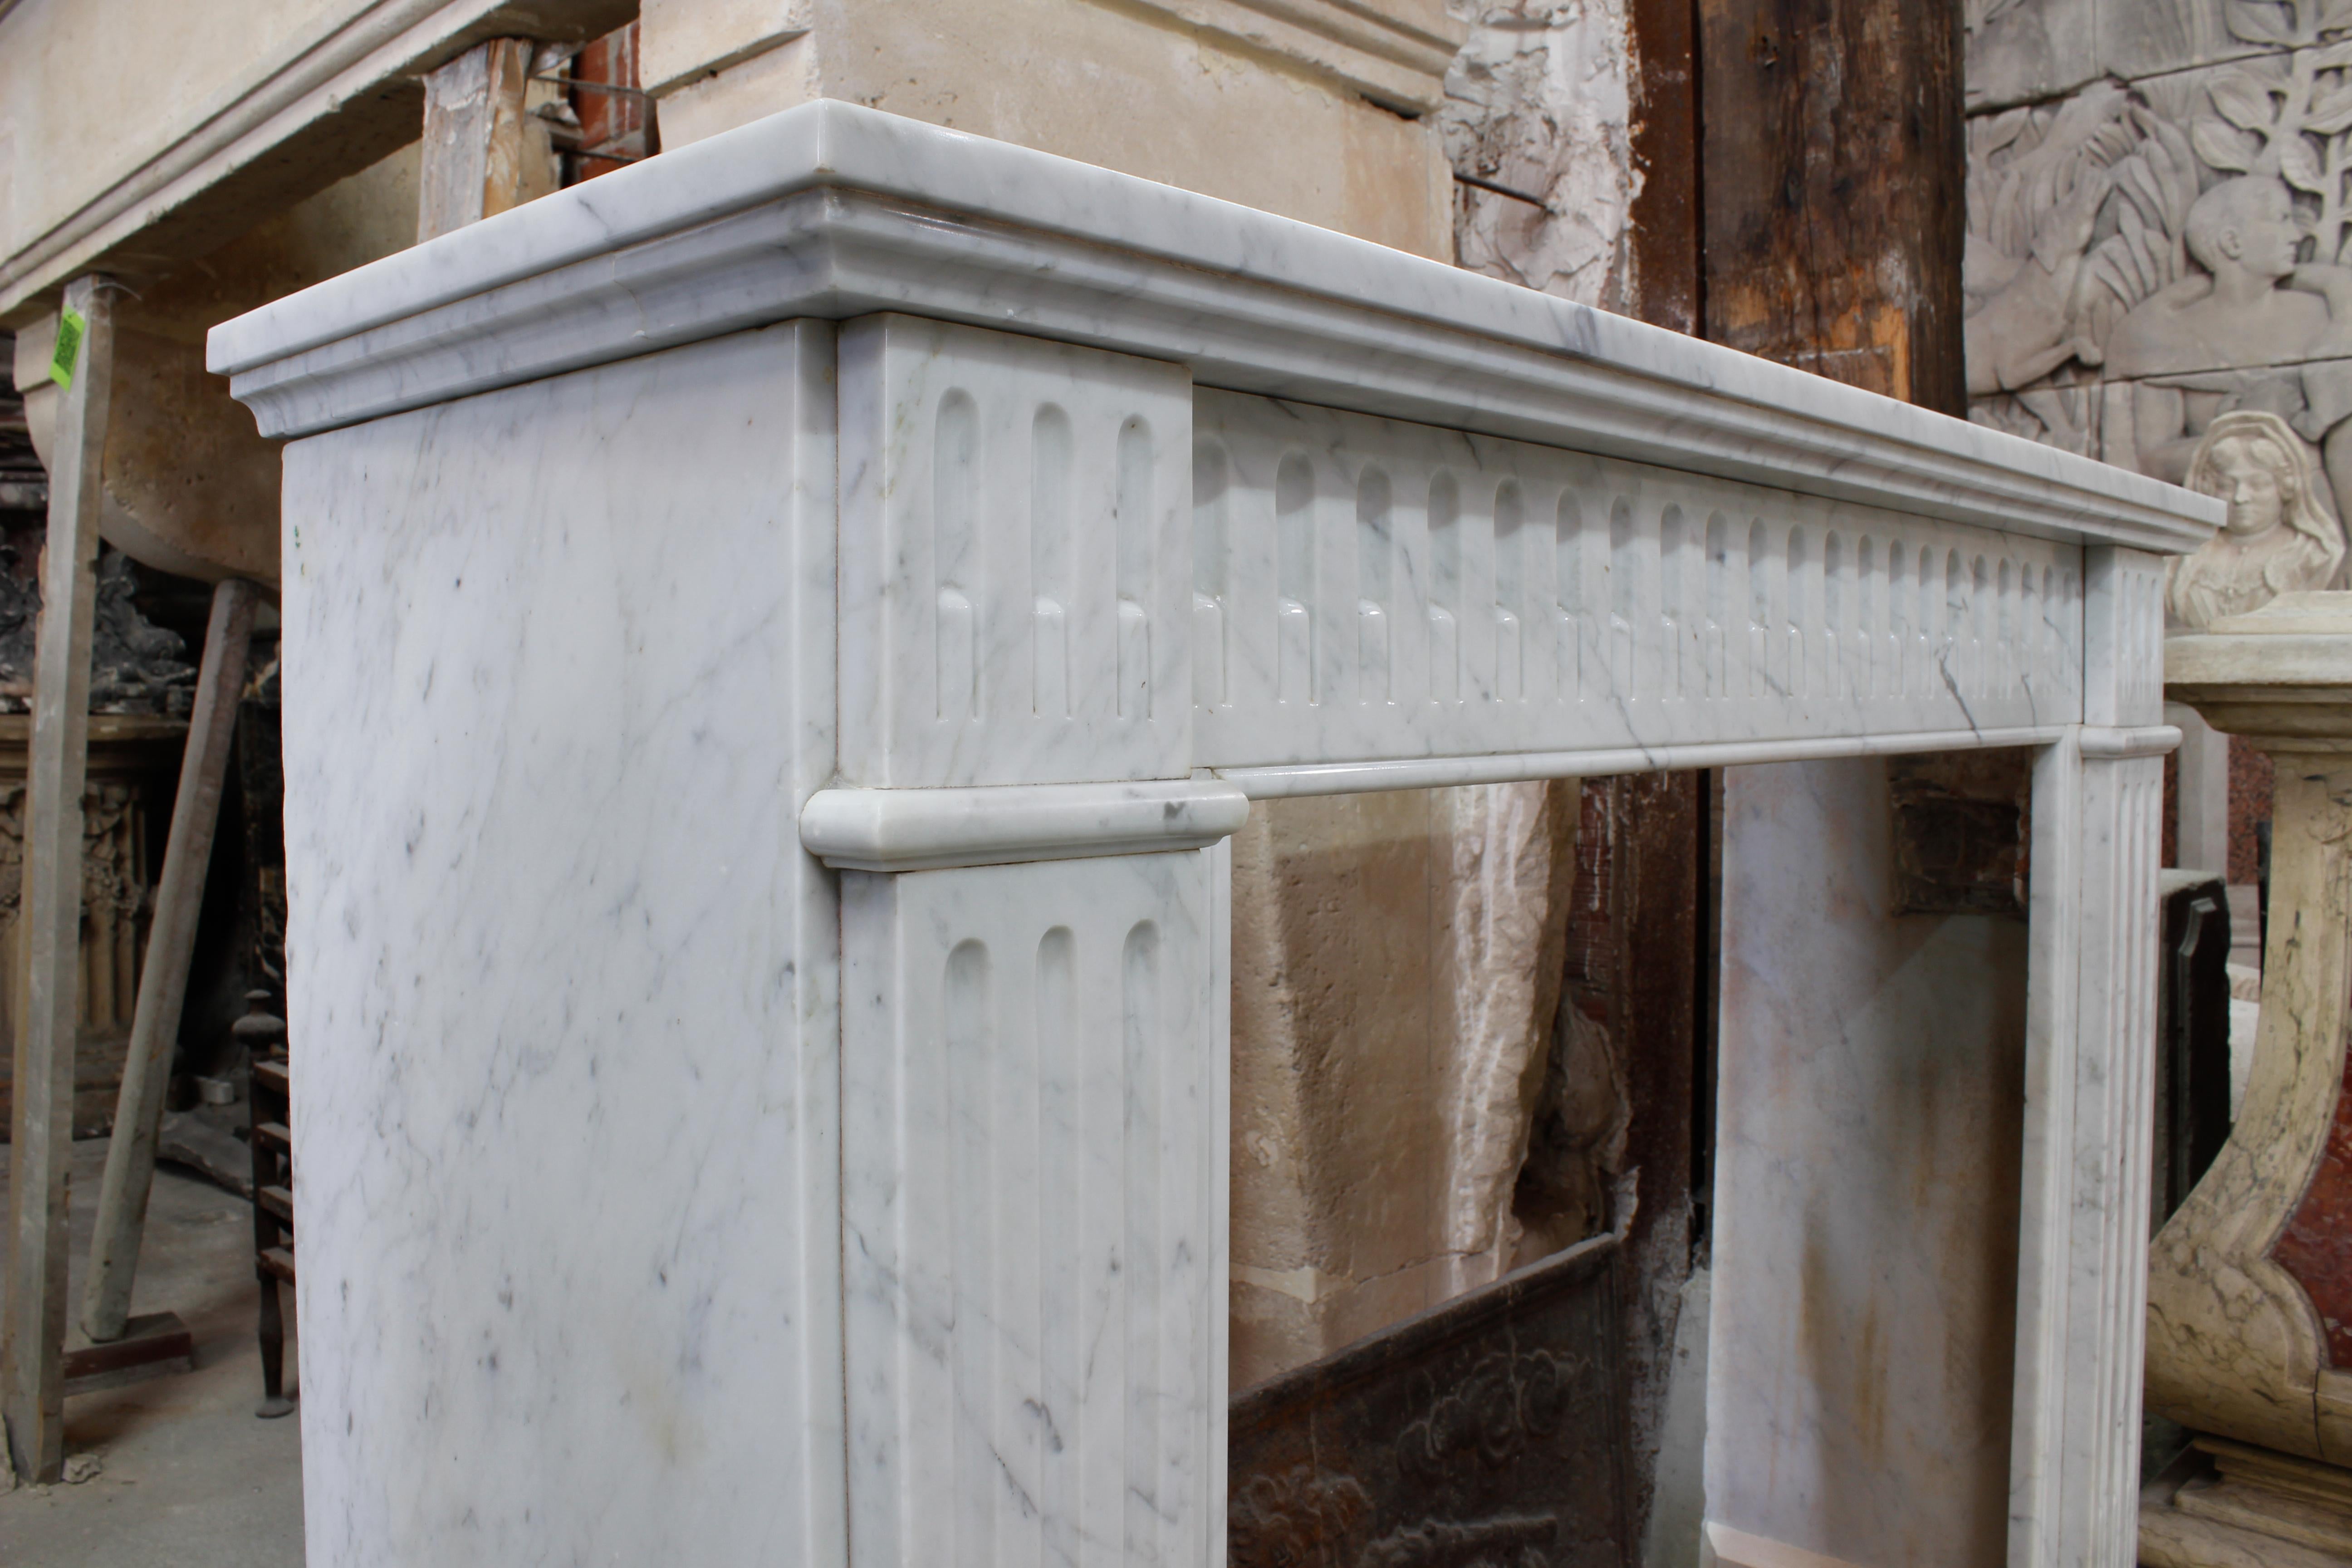 Small antique Louis XVI style fireplace made out of white Carrara marble during the 19th century.
Both jambs and heads are fluted and the entablature is carved with fluting all along its length.

